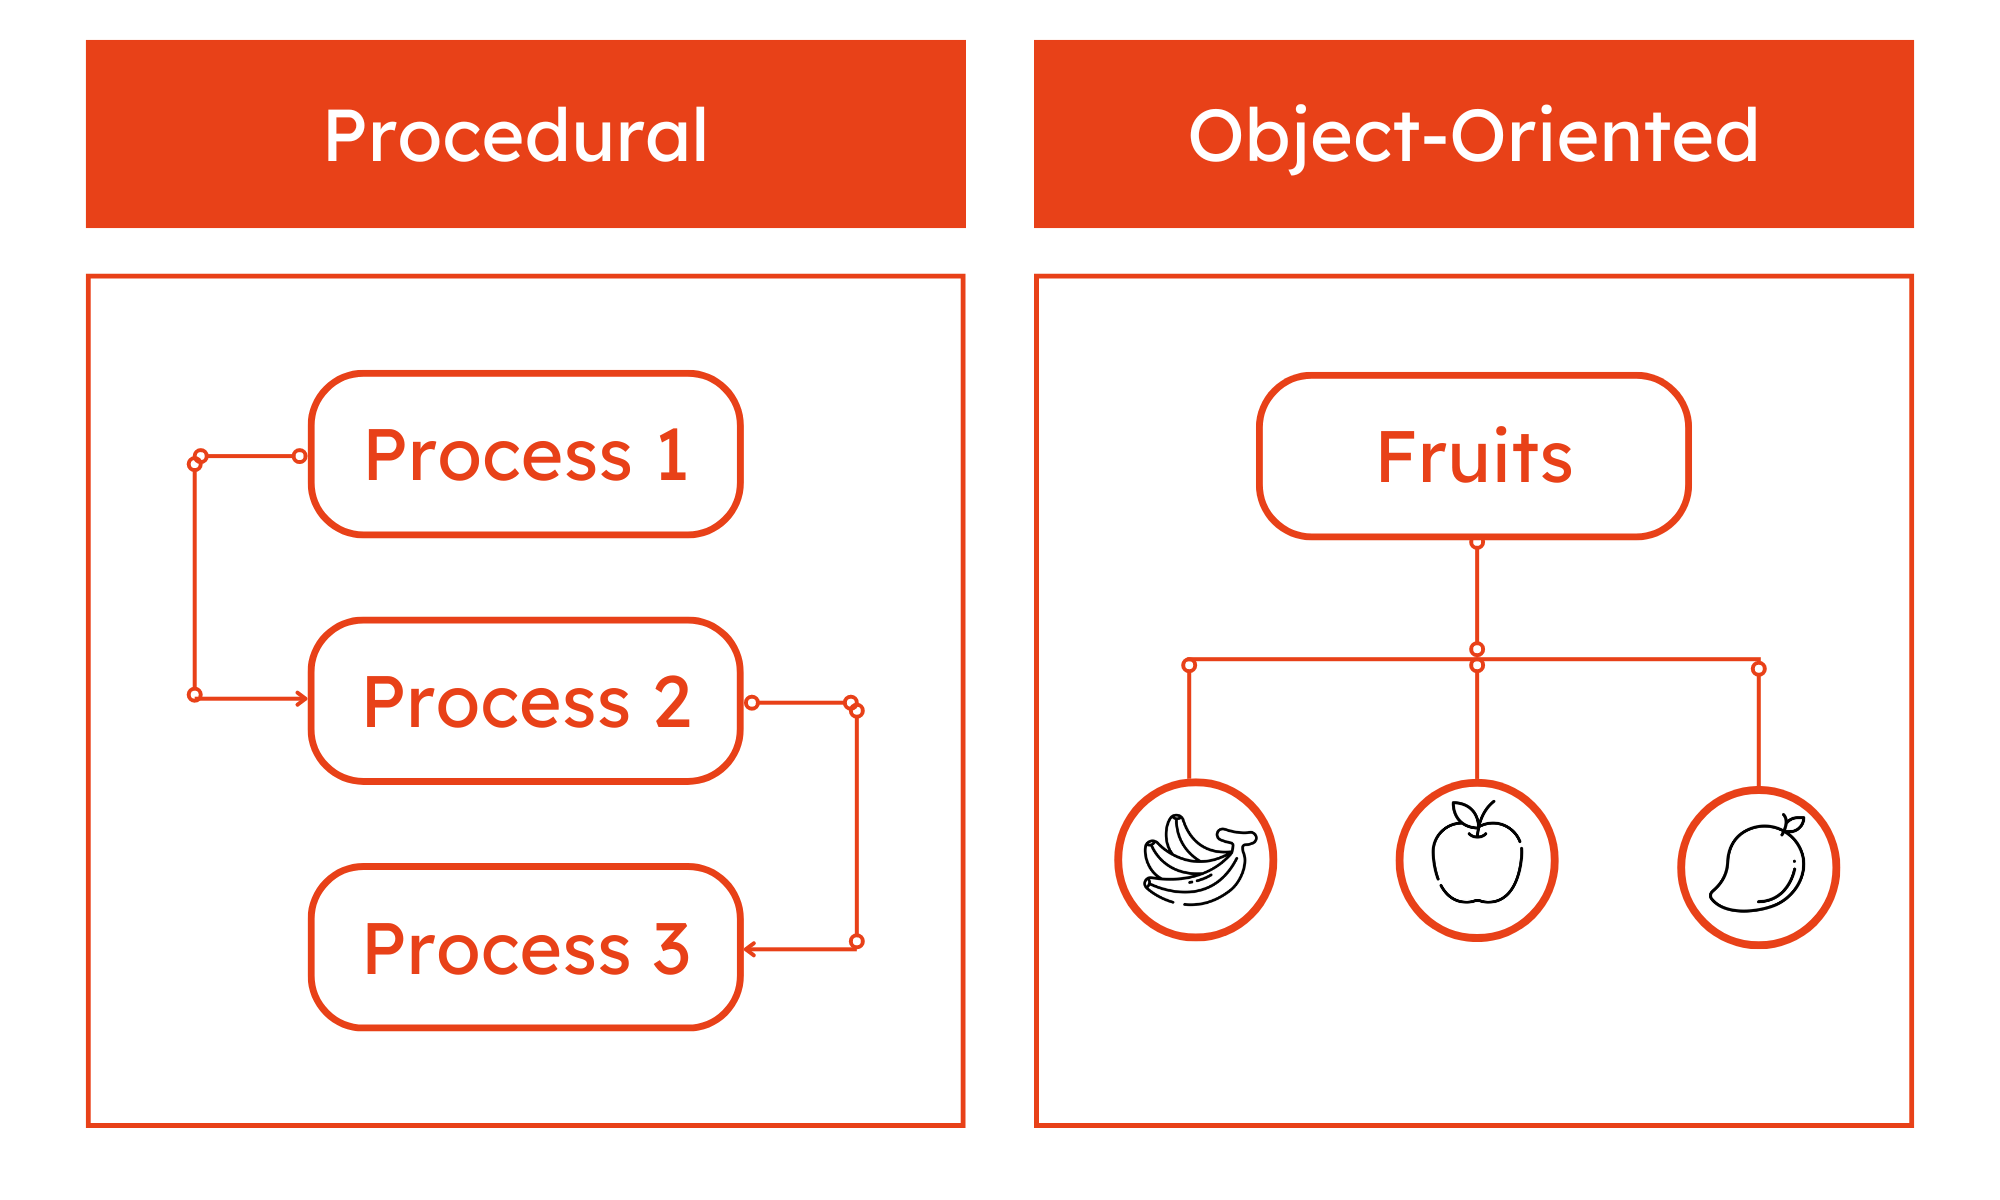 Key Differences Between Procedural and Object-Oriented Programming